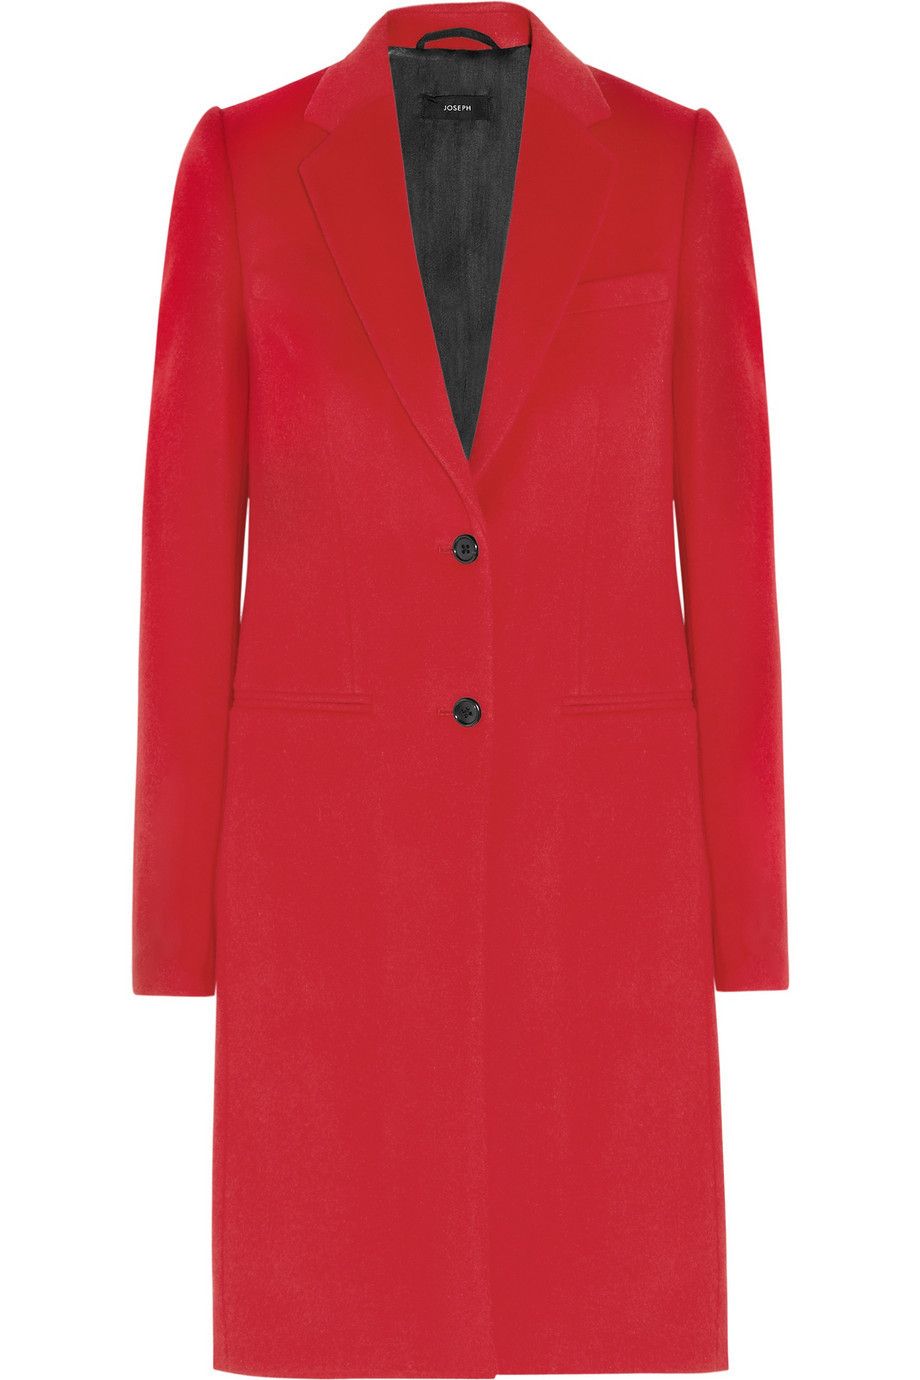 Clothing, Coat, Collar, Sleeve, Textile, Red, Outerwear, Style, Formal wear, Blazer, 